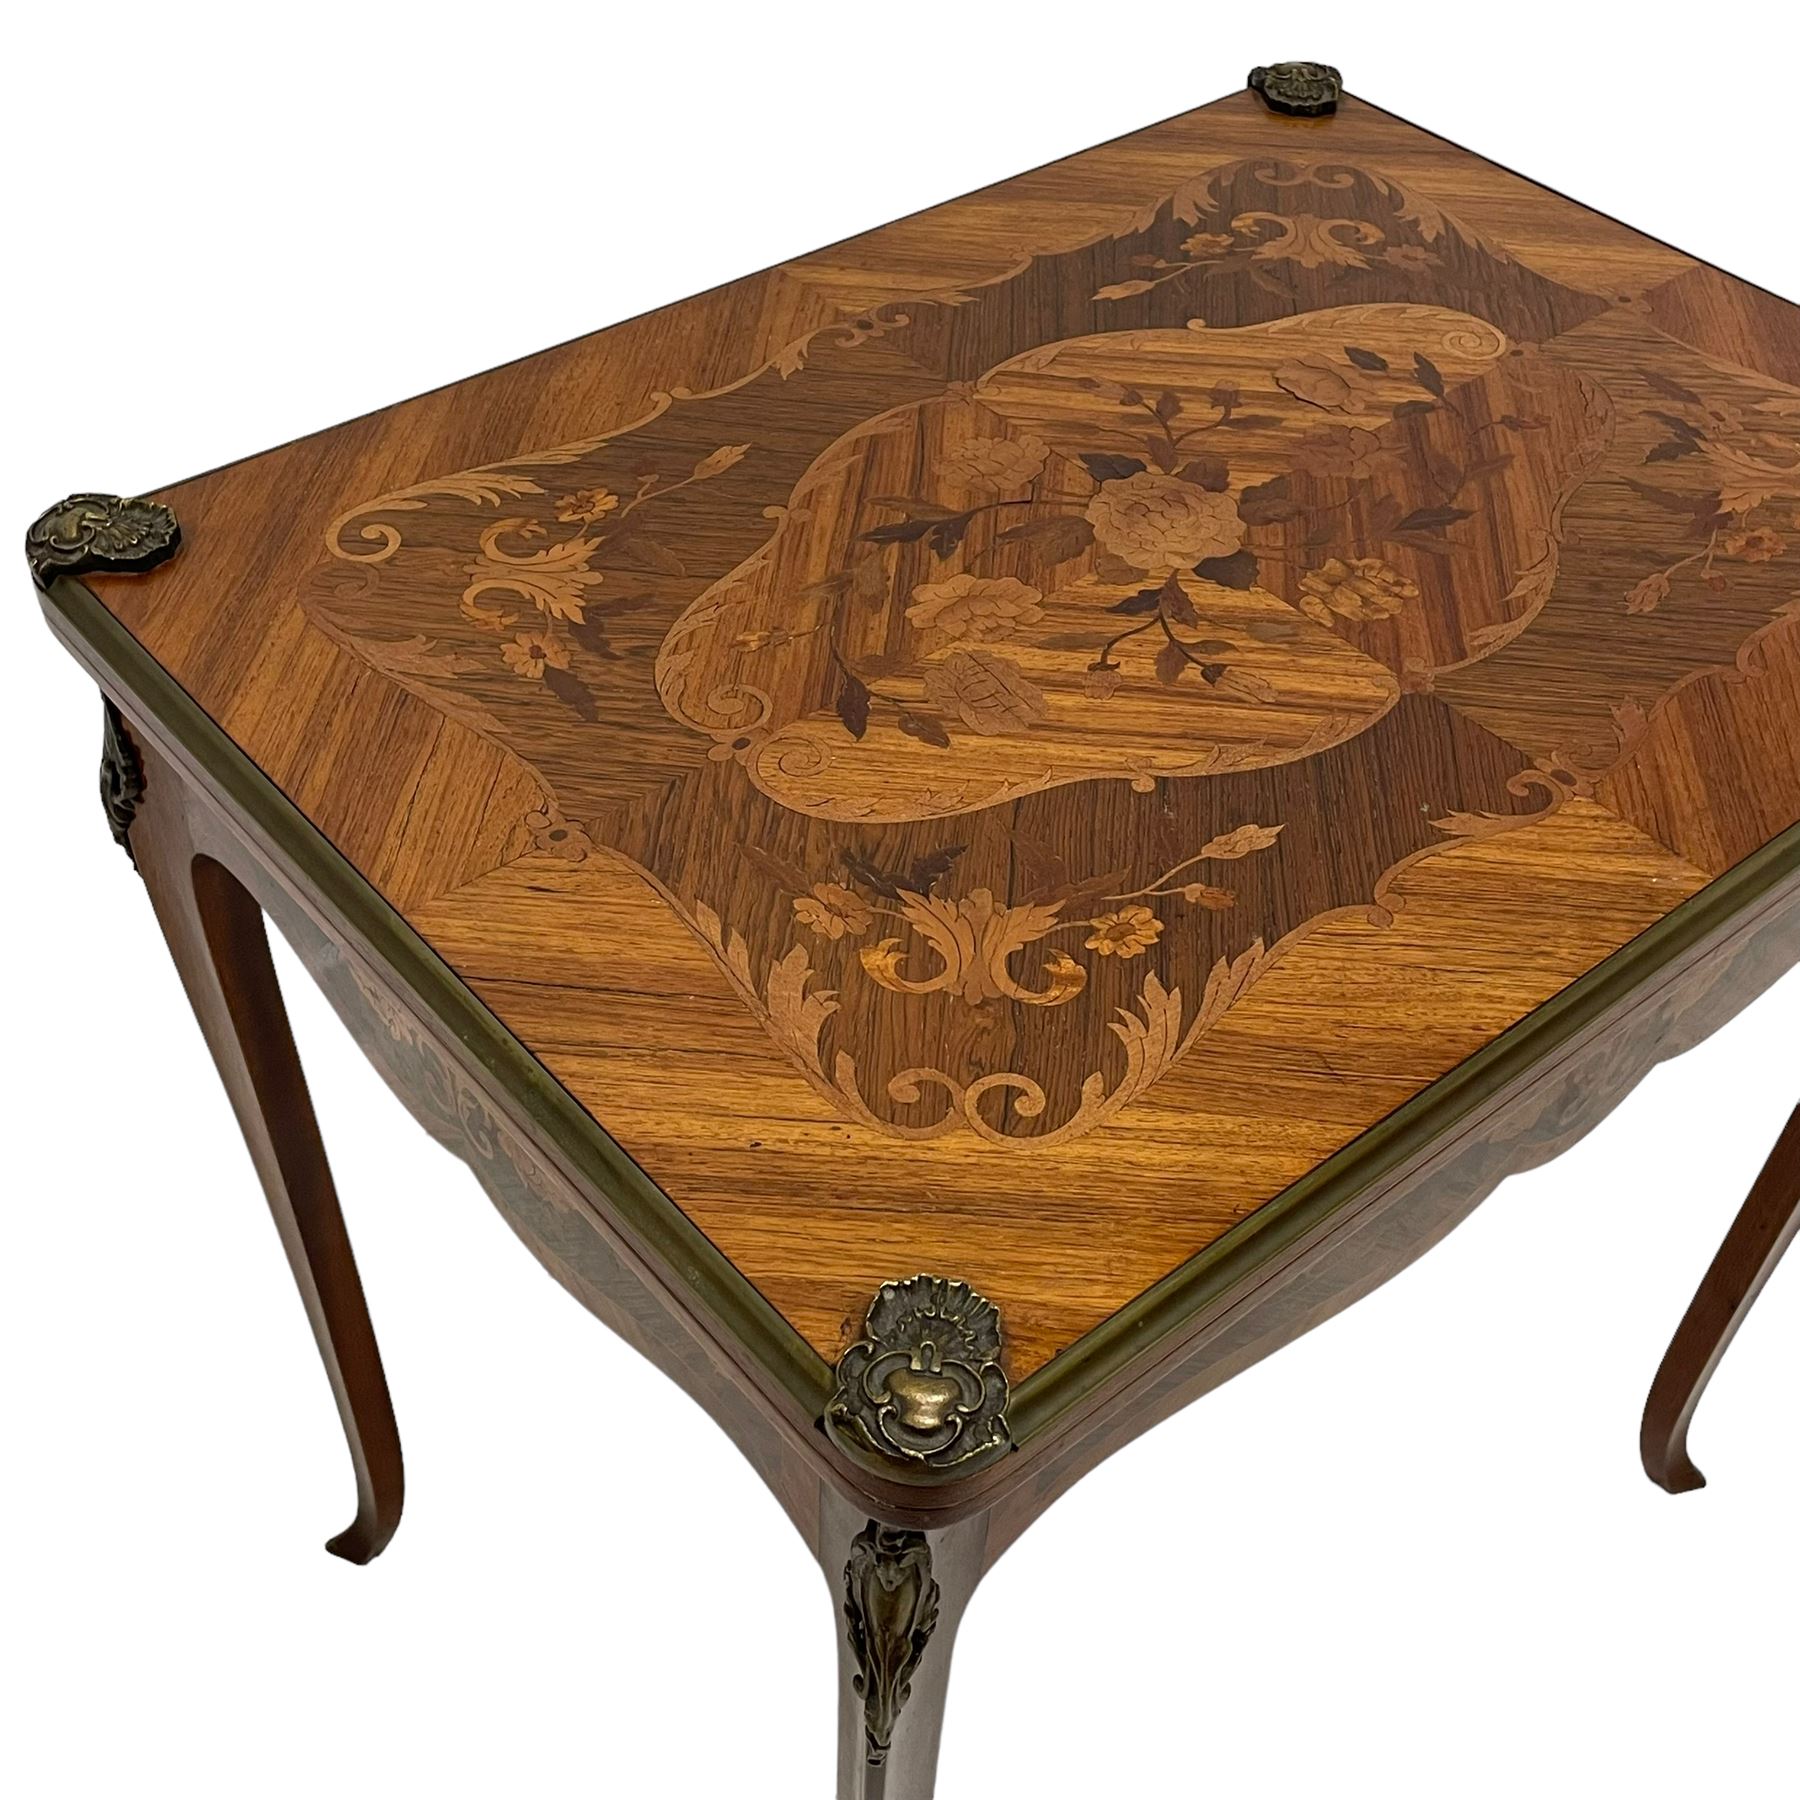 Mid-20th century Kingwood and rosewood card or games table - Image 4 of 10